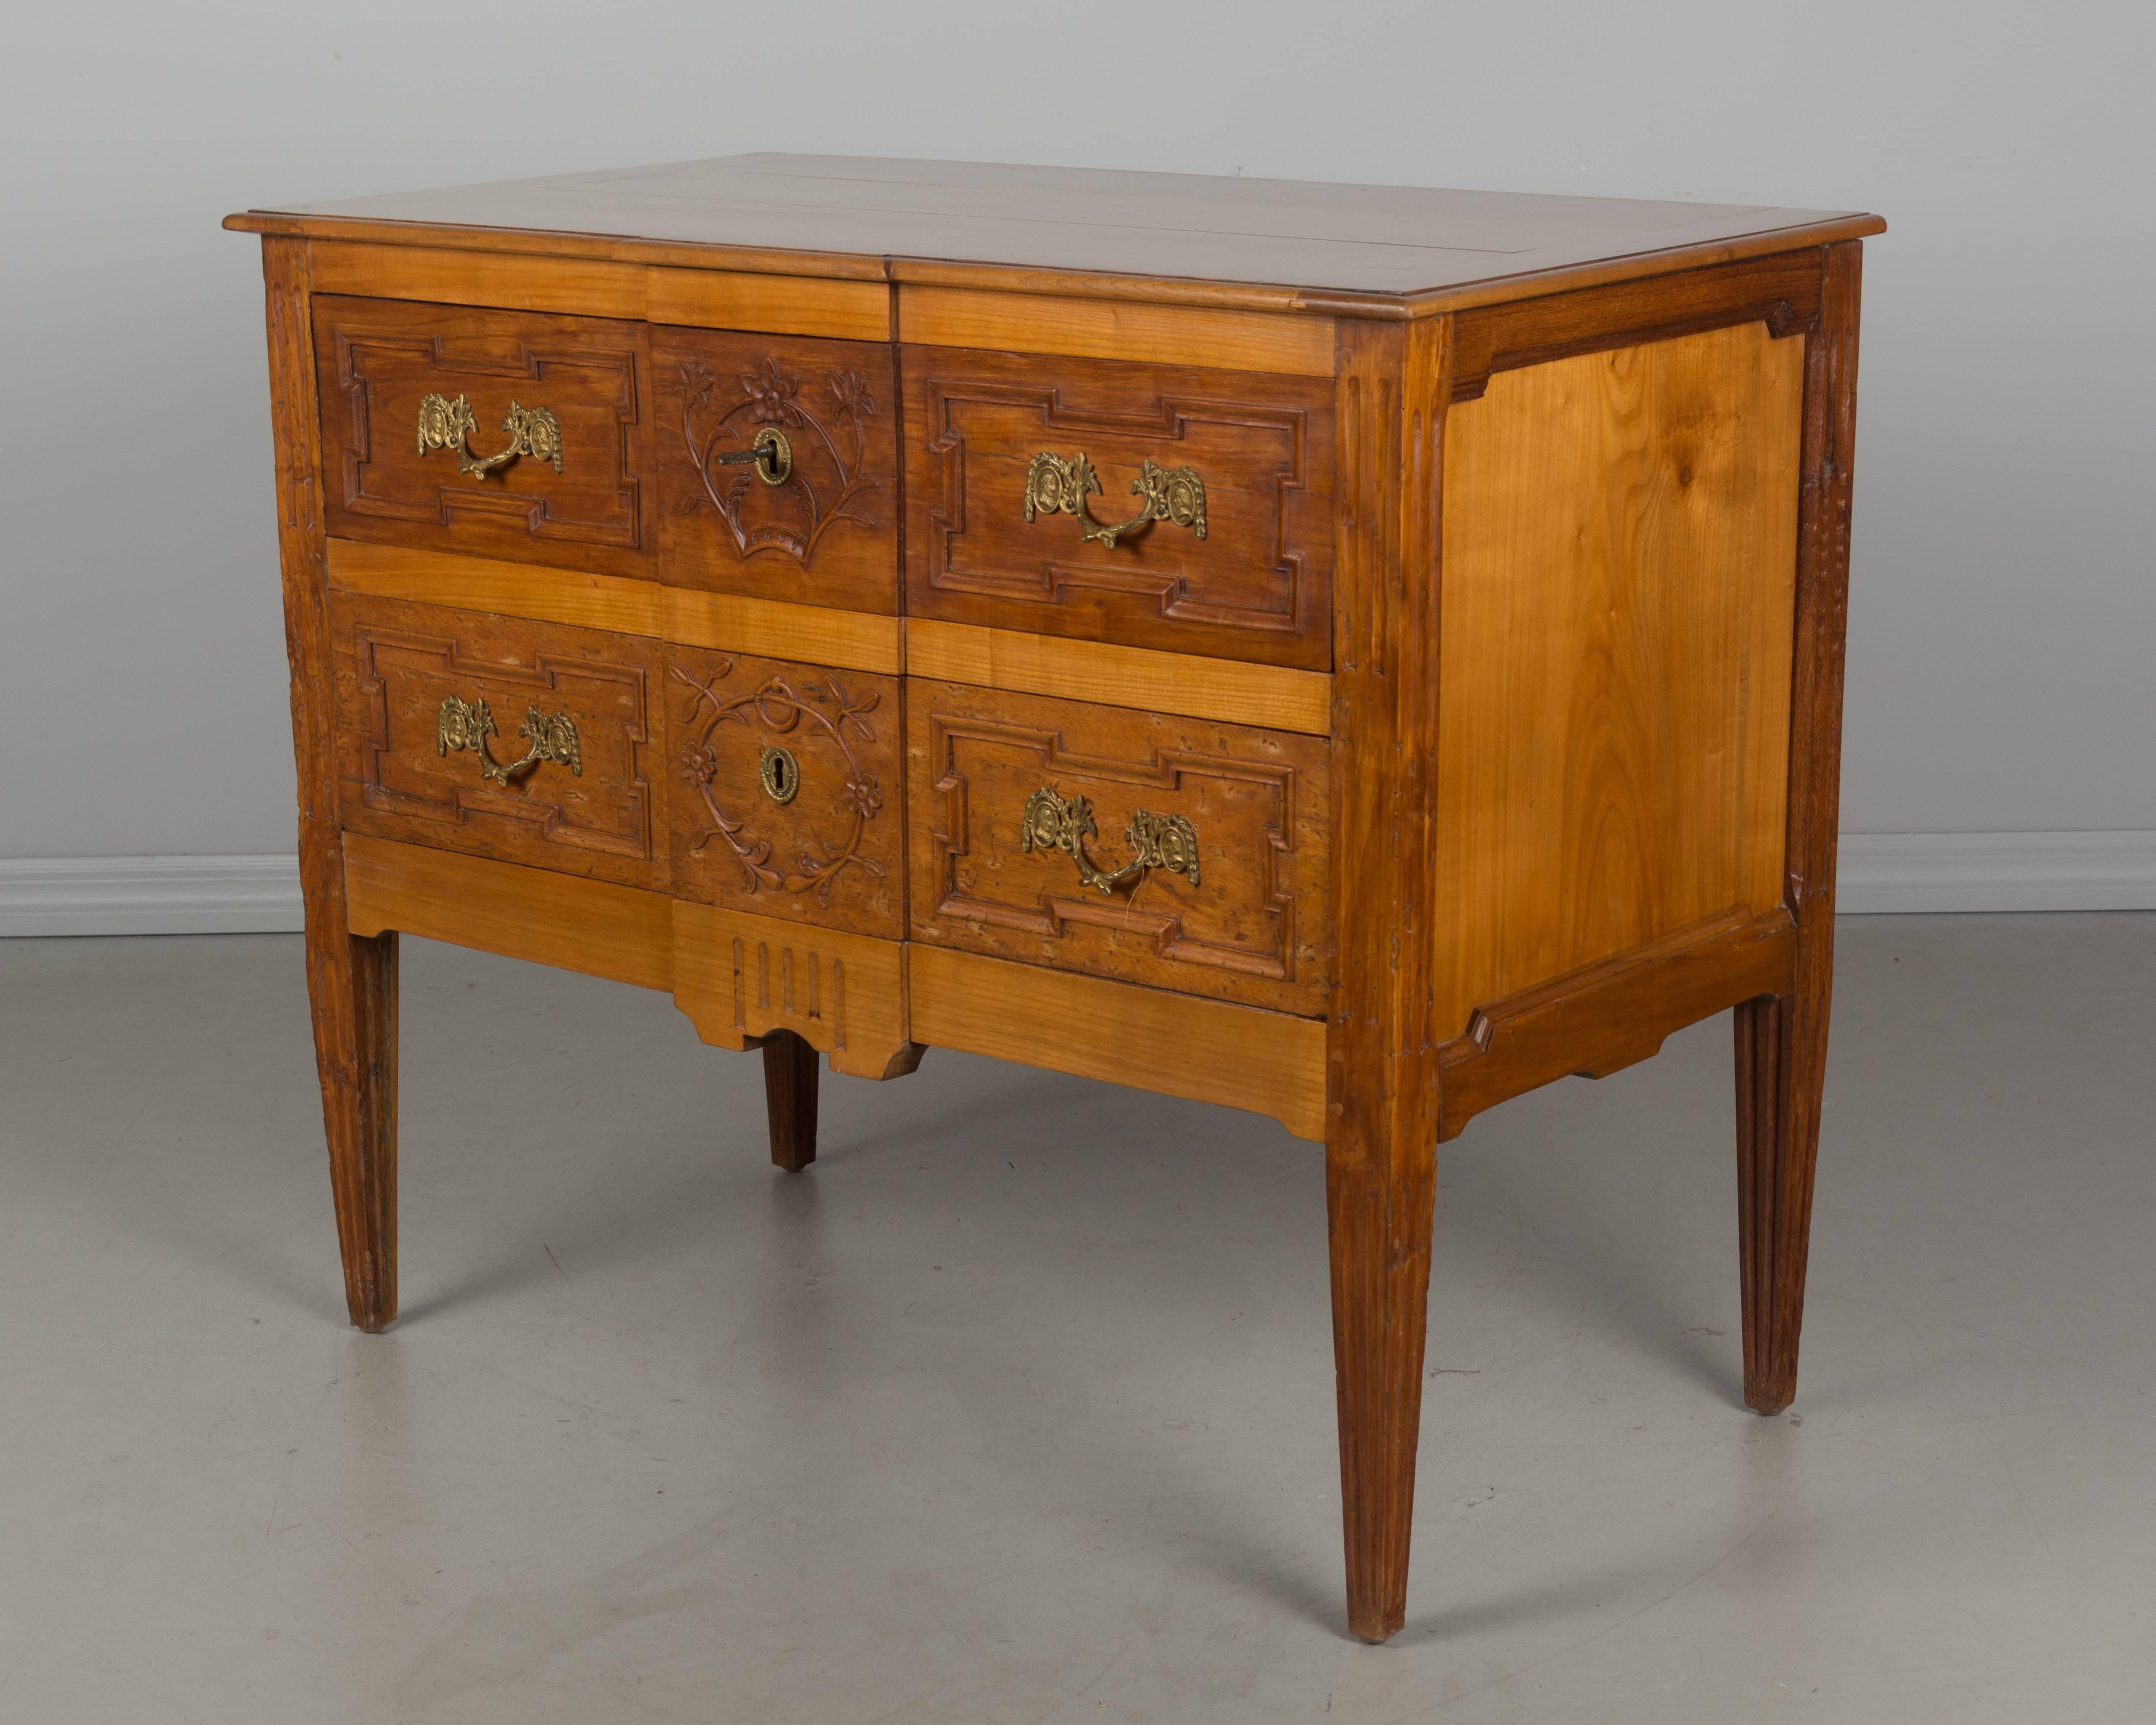 A fine 20th century Louis XVI style commode made of cherry and walnut with two dovetailed drawers. Original bronze hardware and lock and key in working order. Minor restoration on back legs.
More photos available upon request. We have a large